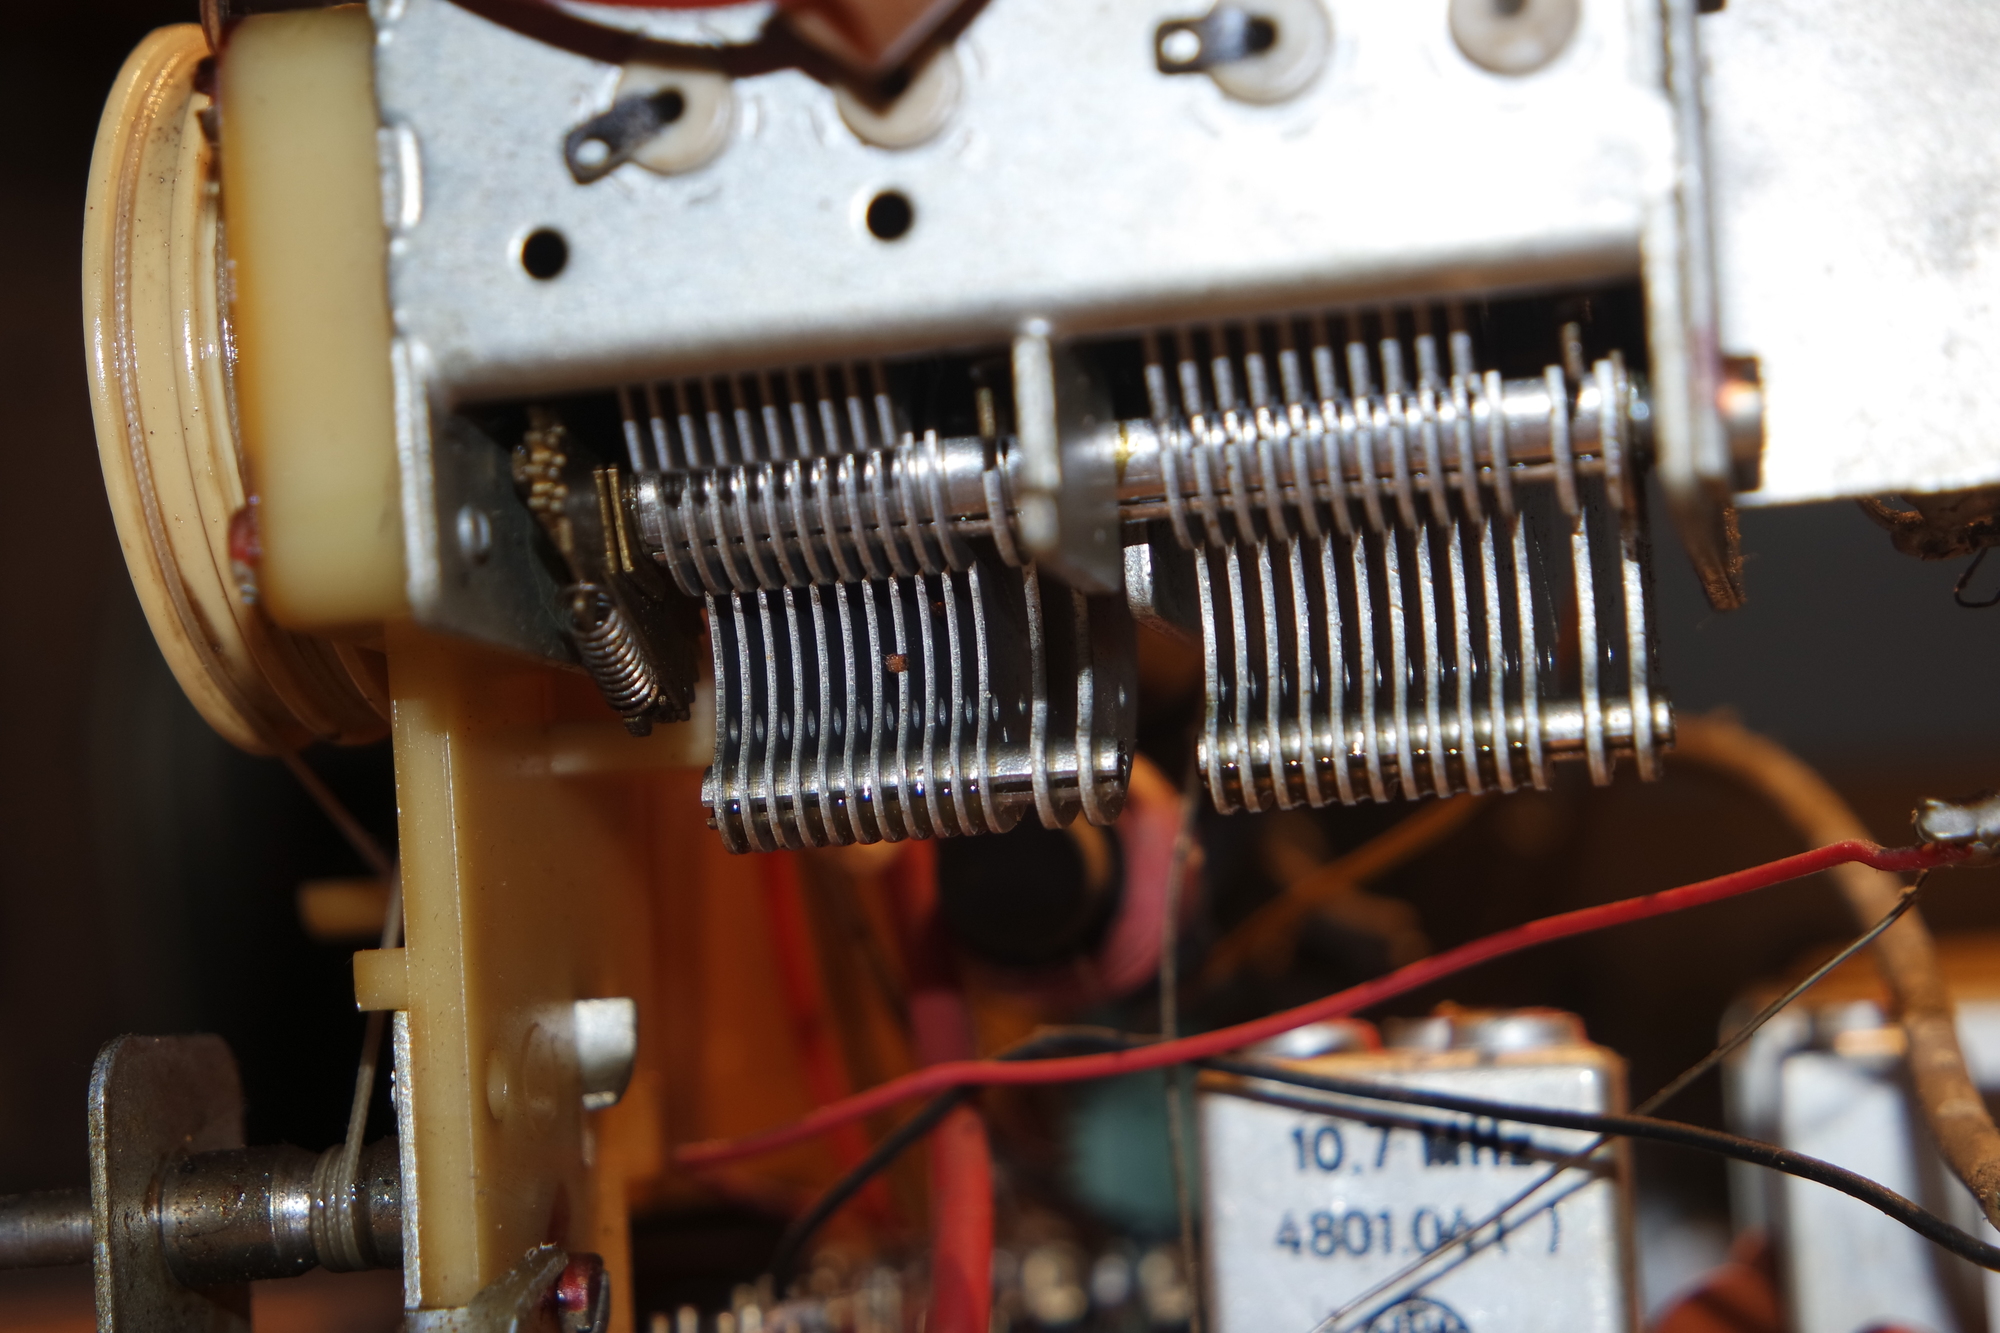 Side view of the mechanical varactor